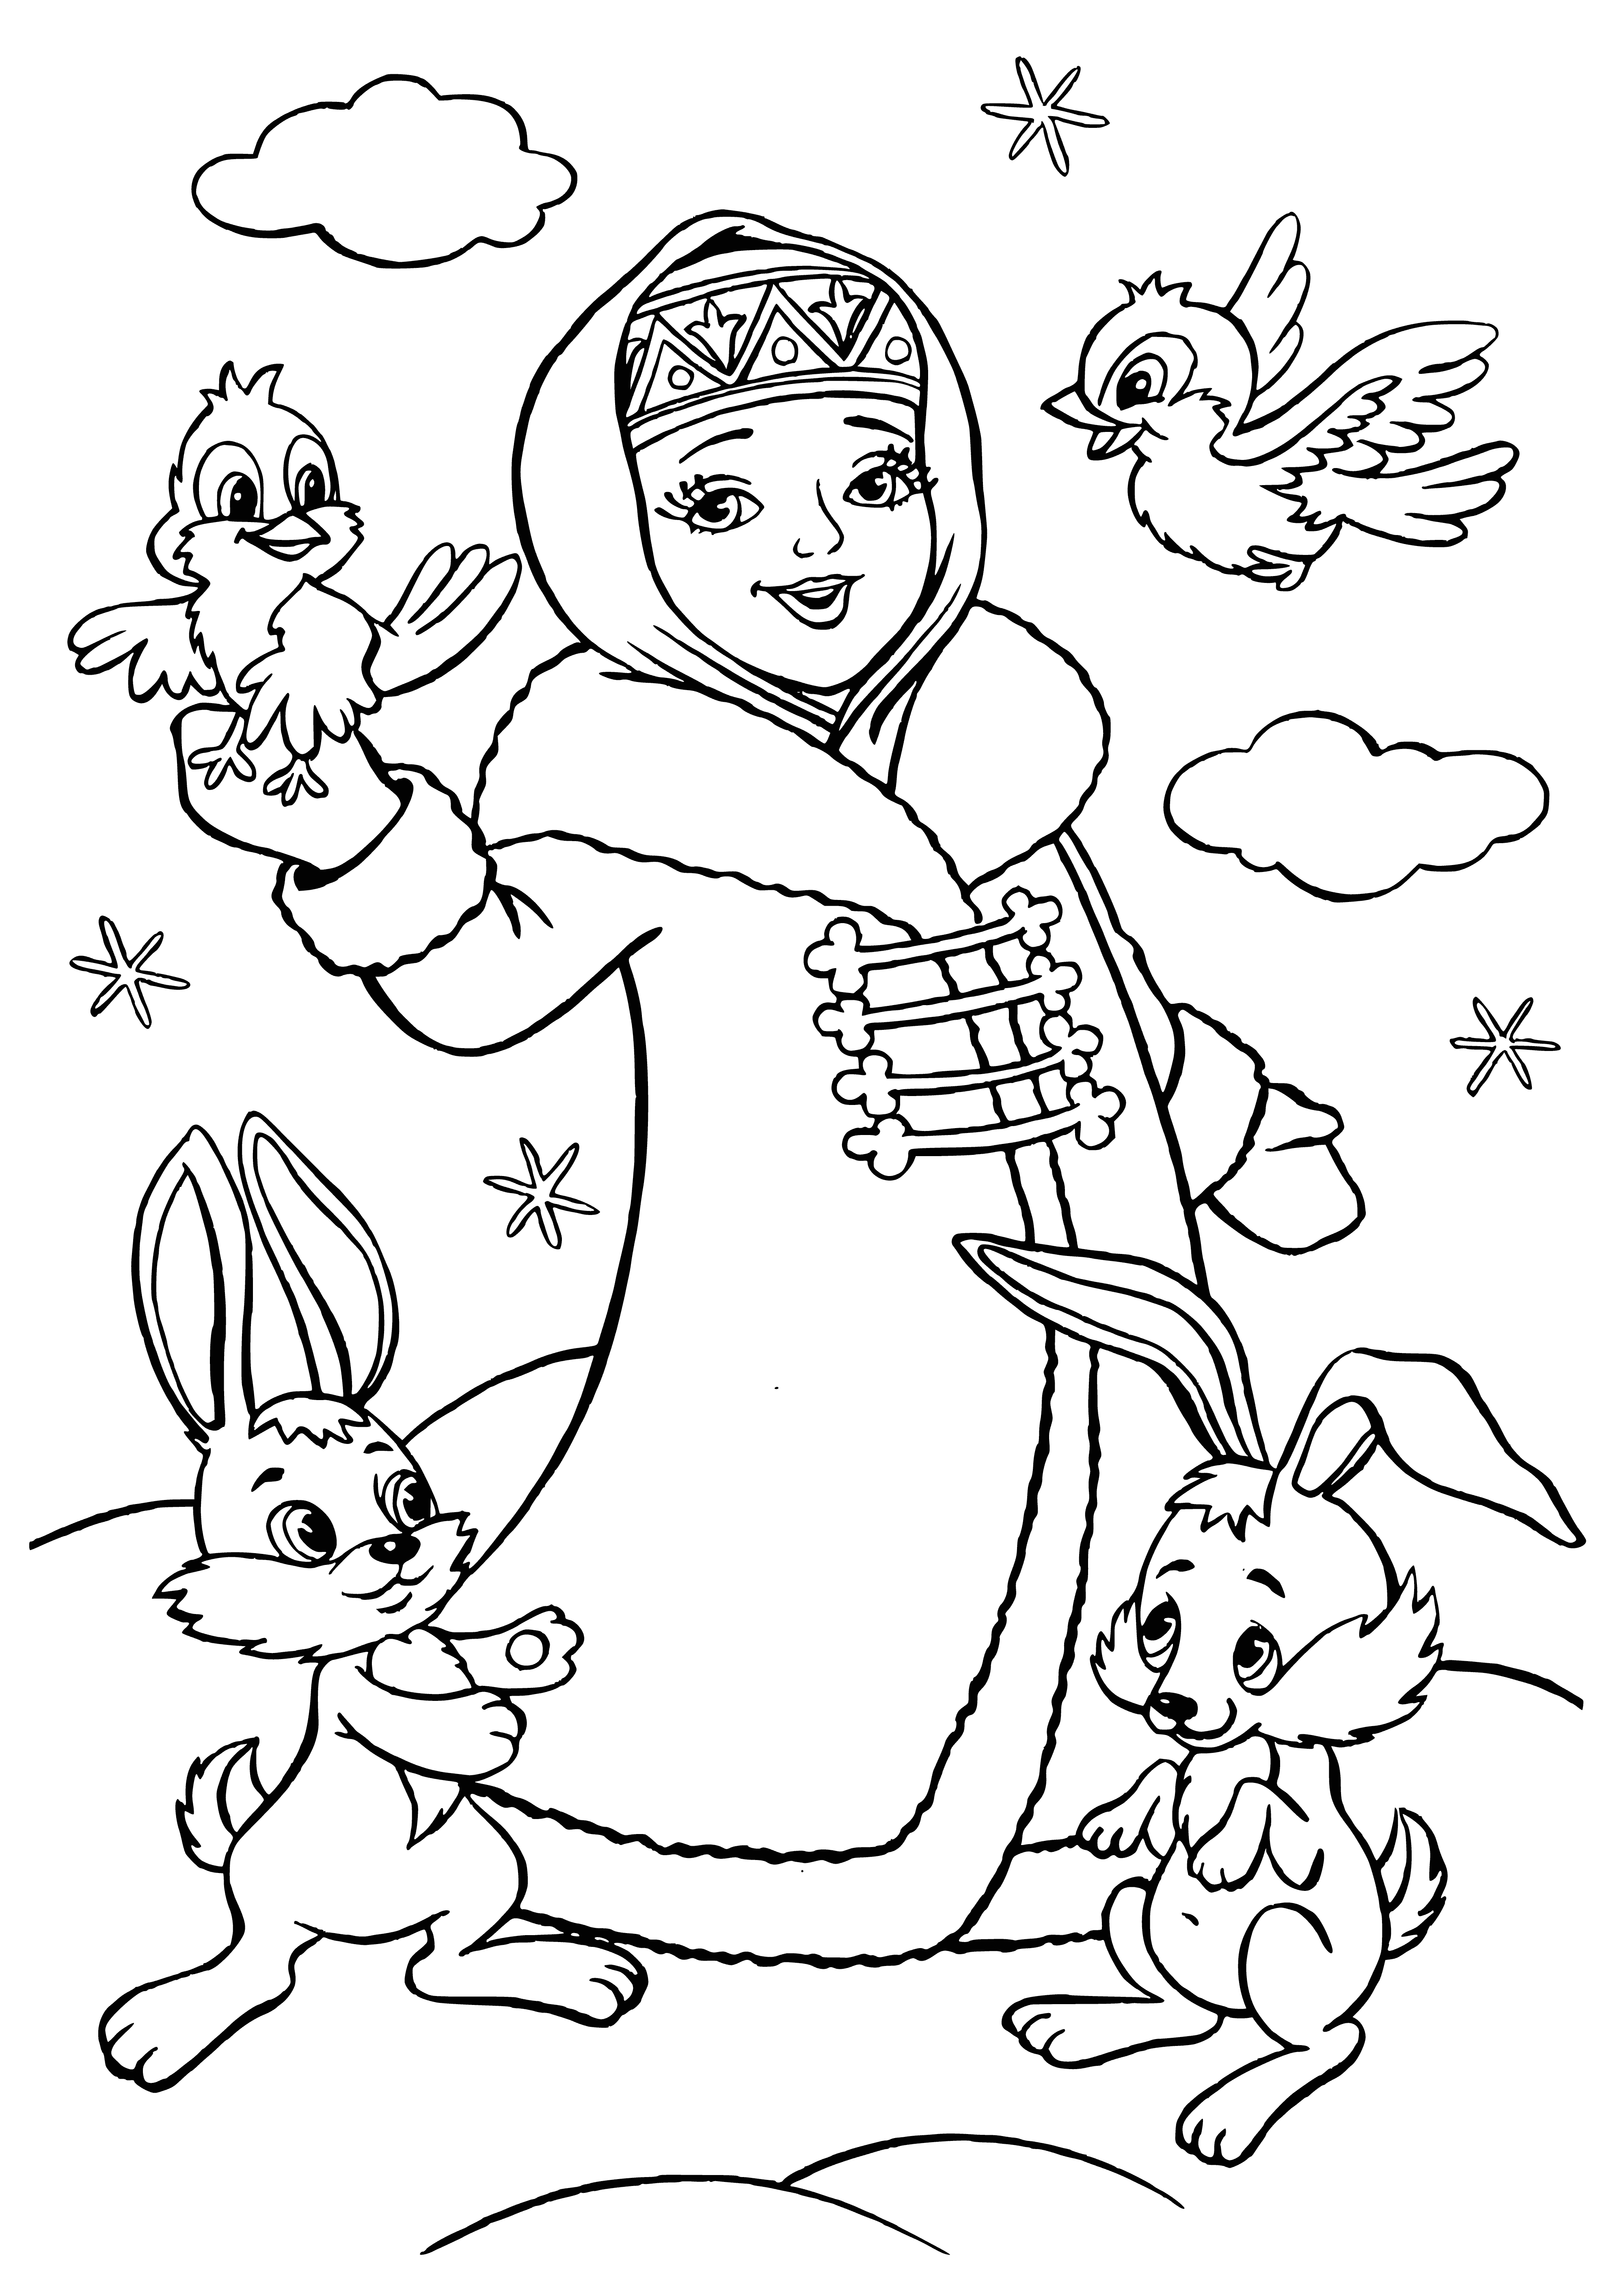 coloring page: Snow Maiden in center of coloring page, 2 hares beside her. White dress, long white hair, snowflakes falling.